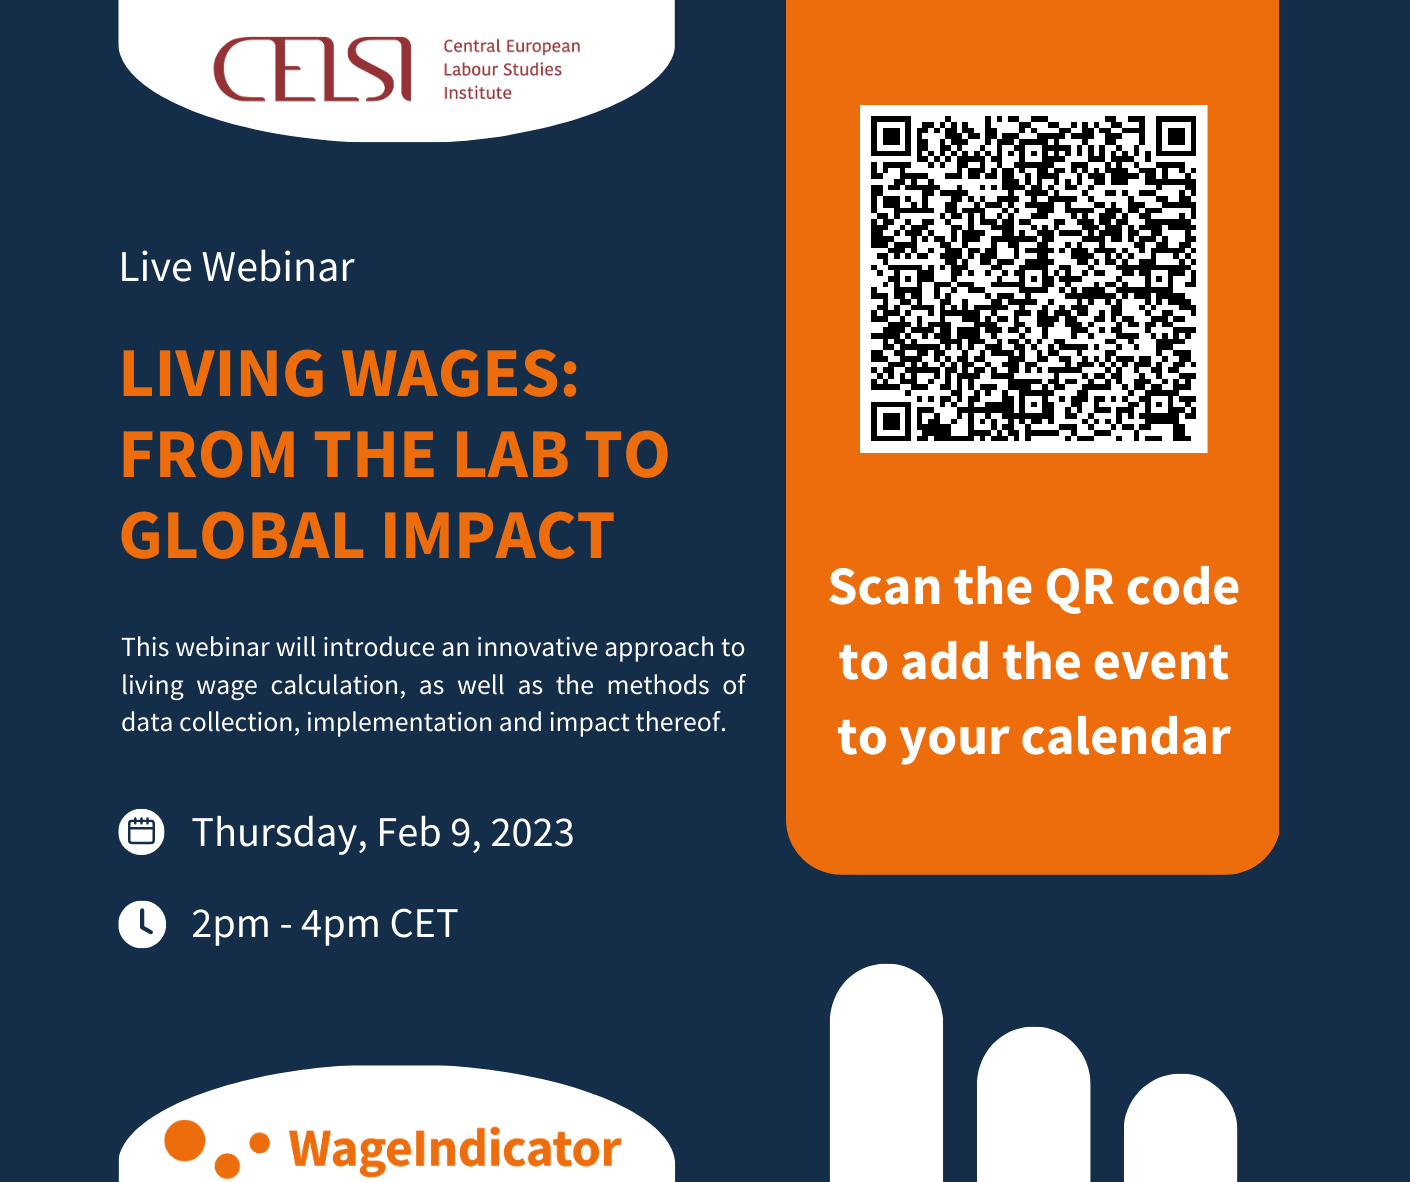 On February 9, 2023, CELSI & WageIndicator held an internal webinar on living wages